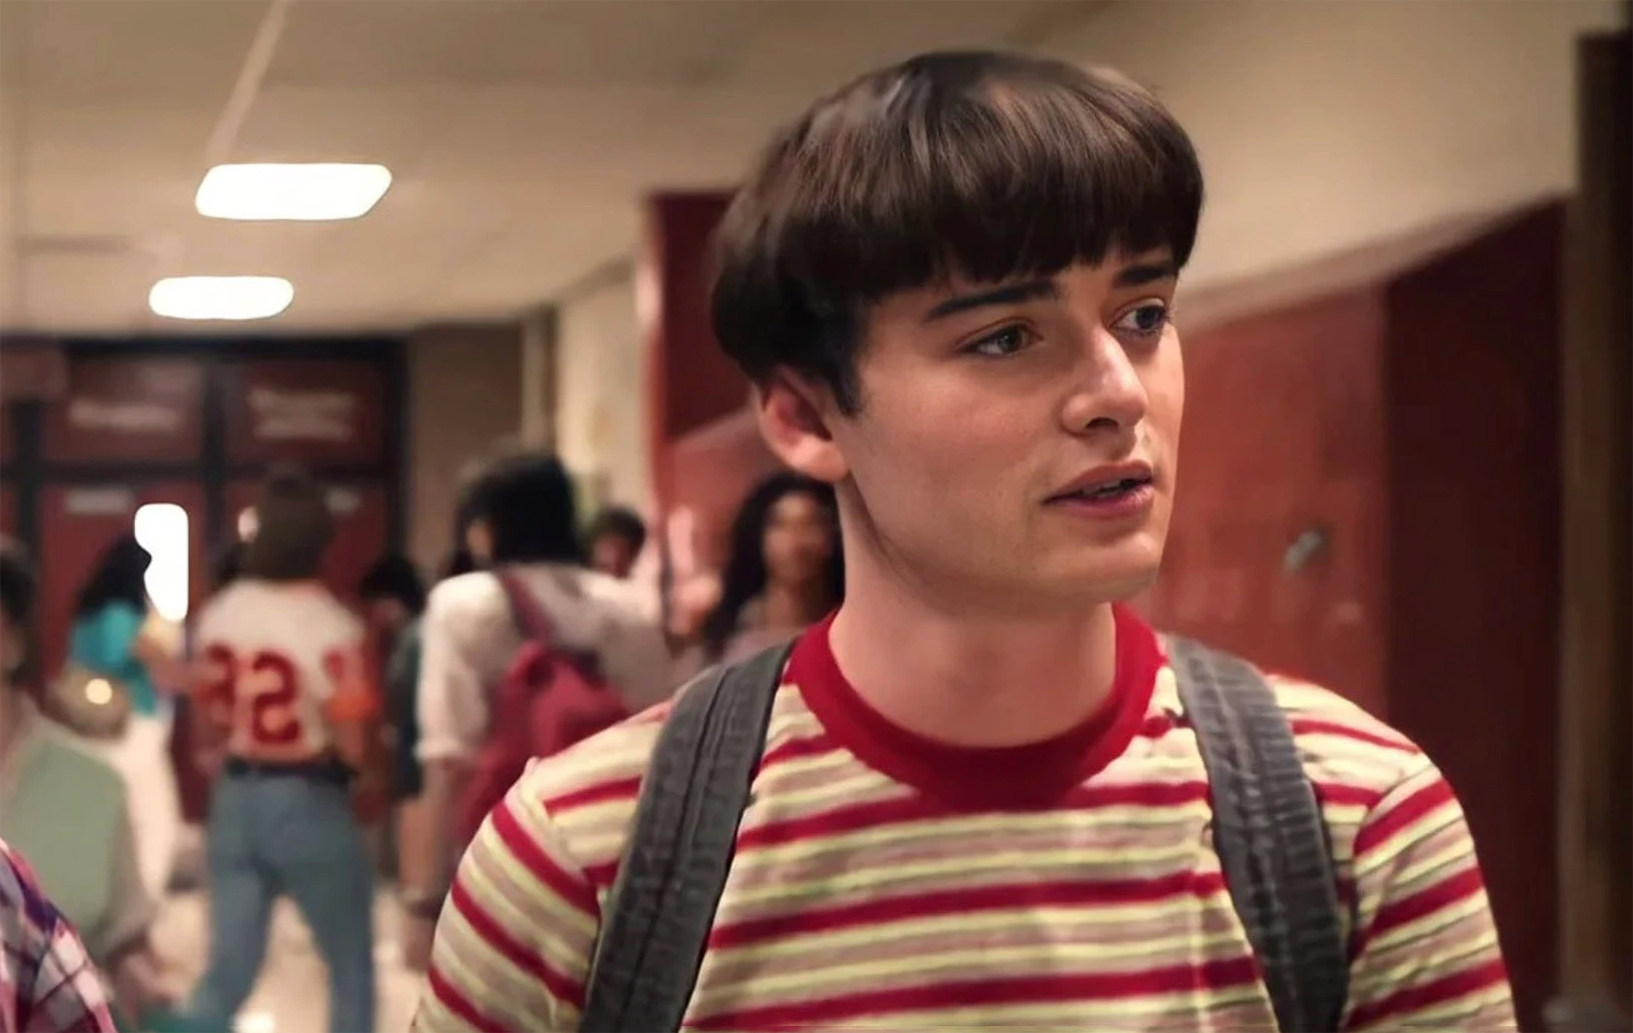 Stranger Things' Star Noah Schnapp Confirms Will Byers Is Gay